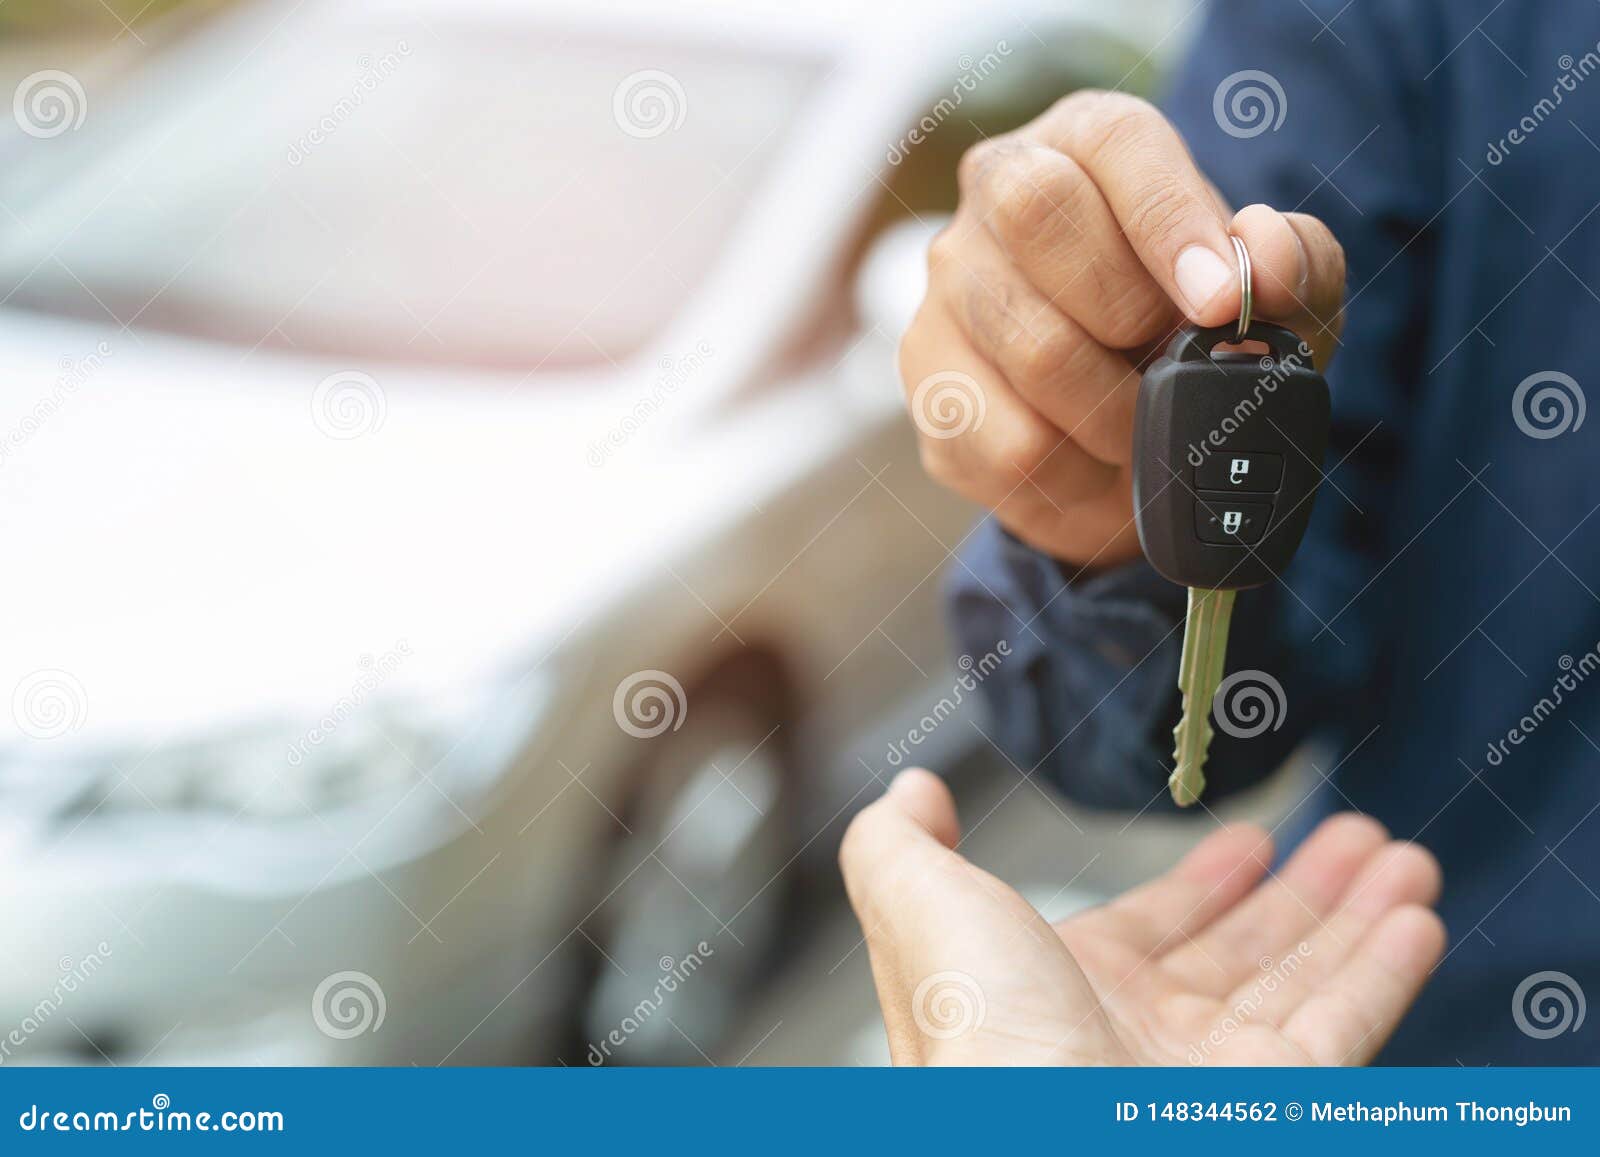 car key, businessman handing over gives the car key to the other woman